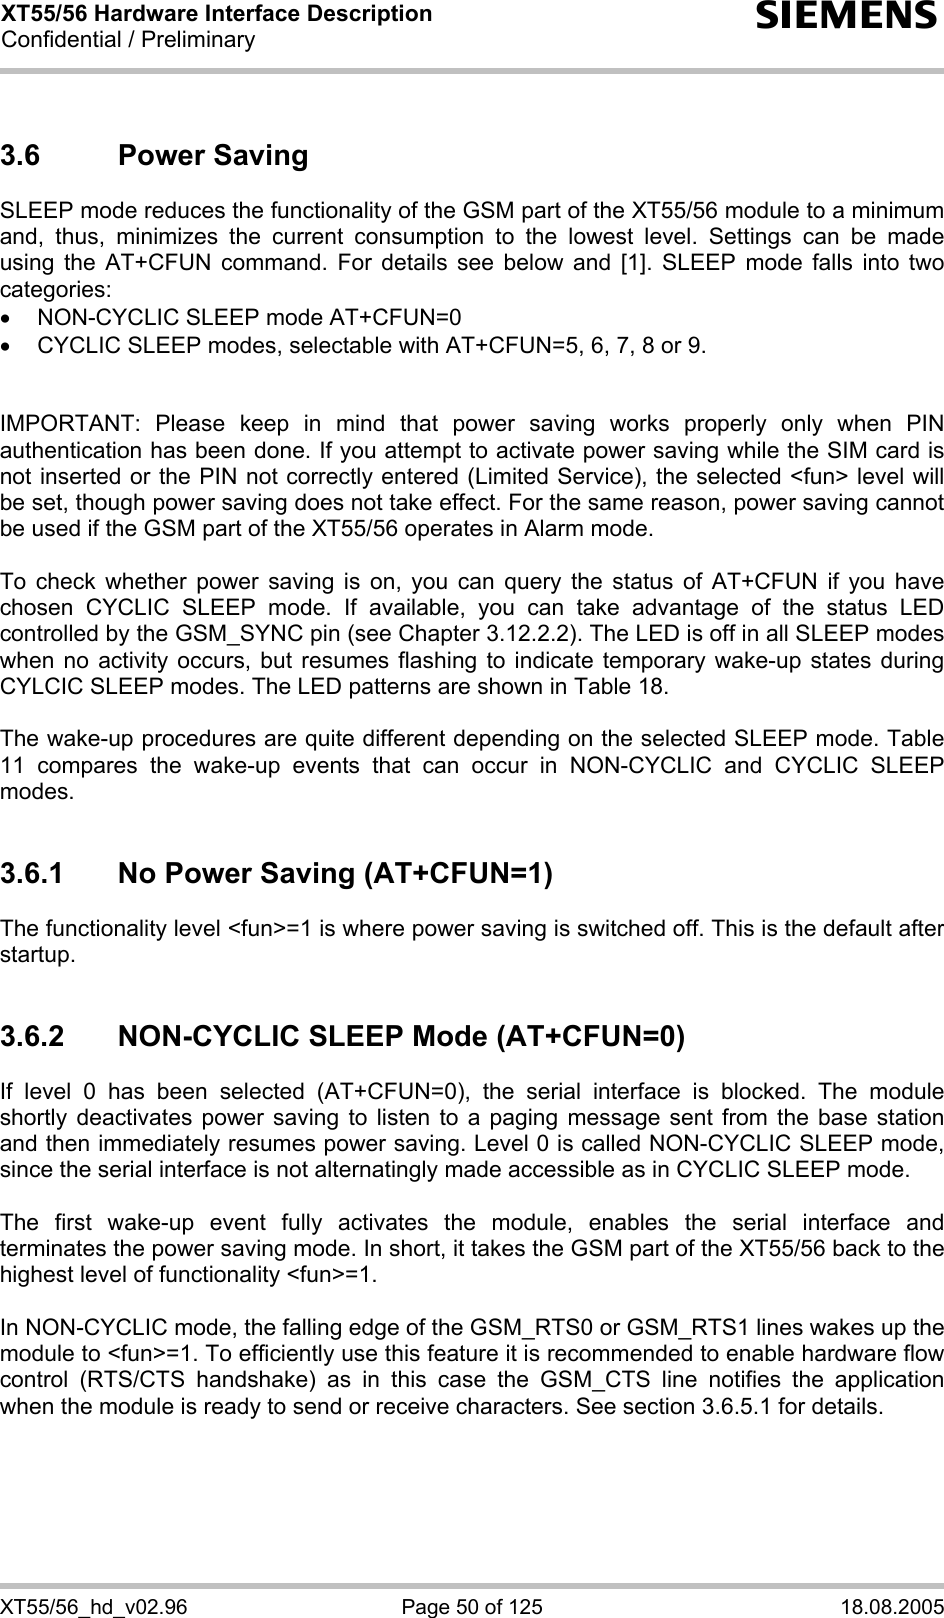 XT55/56 Hardware Interface Description Confidential / Preliminary s XT55/56_hd_v02.96  Page 50 of 125  18.08.2005 3.6 Power Saving SLEEP mode reduces the functionality of the GSM part of the XT55/56 module to a minimum and, thus, minimizes the current consumption to the lowest level. Settings can be made using the AT+CFUN command. For details see below and [1]. SLEEP mode falls into two categories: •  NON-CYCLIC SLEEP mode AT+CFUN=0 •  CYCLIC SLEEP modes, selectable with AT+CFUN=5, 6, 7, 8 or 9.   IMPORTANT: Please keep in mind that power saving works properly only when PIN authentication has been done. If you attempt to activate power saving while the SIM card is not inserted or the PIN not correctly entered (Limited Service), the selected &lt;fun&gt; level will be set, though power saving does not take effect. For the same reason, power saving cannot be used if the GSM part of the XT55/56 operates in Alarm mode.  To check whether power saving is on, you can query the status of AT+CFUN if you have chosen CYCLIC SLEEP mode. If available, you can take advantage of the status LED controlled by the GSM_SYNC pin (see Chapter 3.12.2.2). The LED is off in all SLEEP modes when no activity occurs, but resumes flashing to indicate temporary wake-up states during CYLCIC SLEEP modes. The LED patterns are shown in Table 18.   The wake-up procedures are quite different depending on the selected SLEEP mode. Table 11 compares the wake-up events that can occur in NON-CYCLIC and CYCLIC SLEEP modes.  3.6.1  No Power Saving (AT+CFUN=1) The functionality level &lt;fun&gt;=1 is where power saving is switched off. This is the default after startup.   3.6.2  NON-CYCLIC SLEEP Mode (AT+CFUN=0) If level 0 has been selected (AT+CFUN=0), the serial interface is blocked. The module shortly deactivates power saving to listen to a paging message sent from the base station and then immediately resumes power saving. Level 0 is called NON-CYCLIC SLEEP mode, since the serial interface is not alternatingly made accessible as in CYCLIC SLEEP mode.  The first wake-up event fully activates the module, enables the serial interface and terminates the power saving mode. In short, it takes the GSM part of the XT55/56 back to the highest level of functionality &lt;fun&gt;=1.   In NON-CYCLIC mode, the falling edge of the GSM_RTS0 or GSM_RTS1 lines wakes up the module to &lt;fun&gt;=1. To efficiently use this feature it is recommended to enable hardware flow control (RTS/CTS handshake) as in this case the GSM_CTS line notifies the application when the module is ready to send or receive characters. See section 3.6.5.1 for details.   